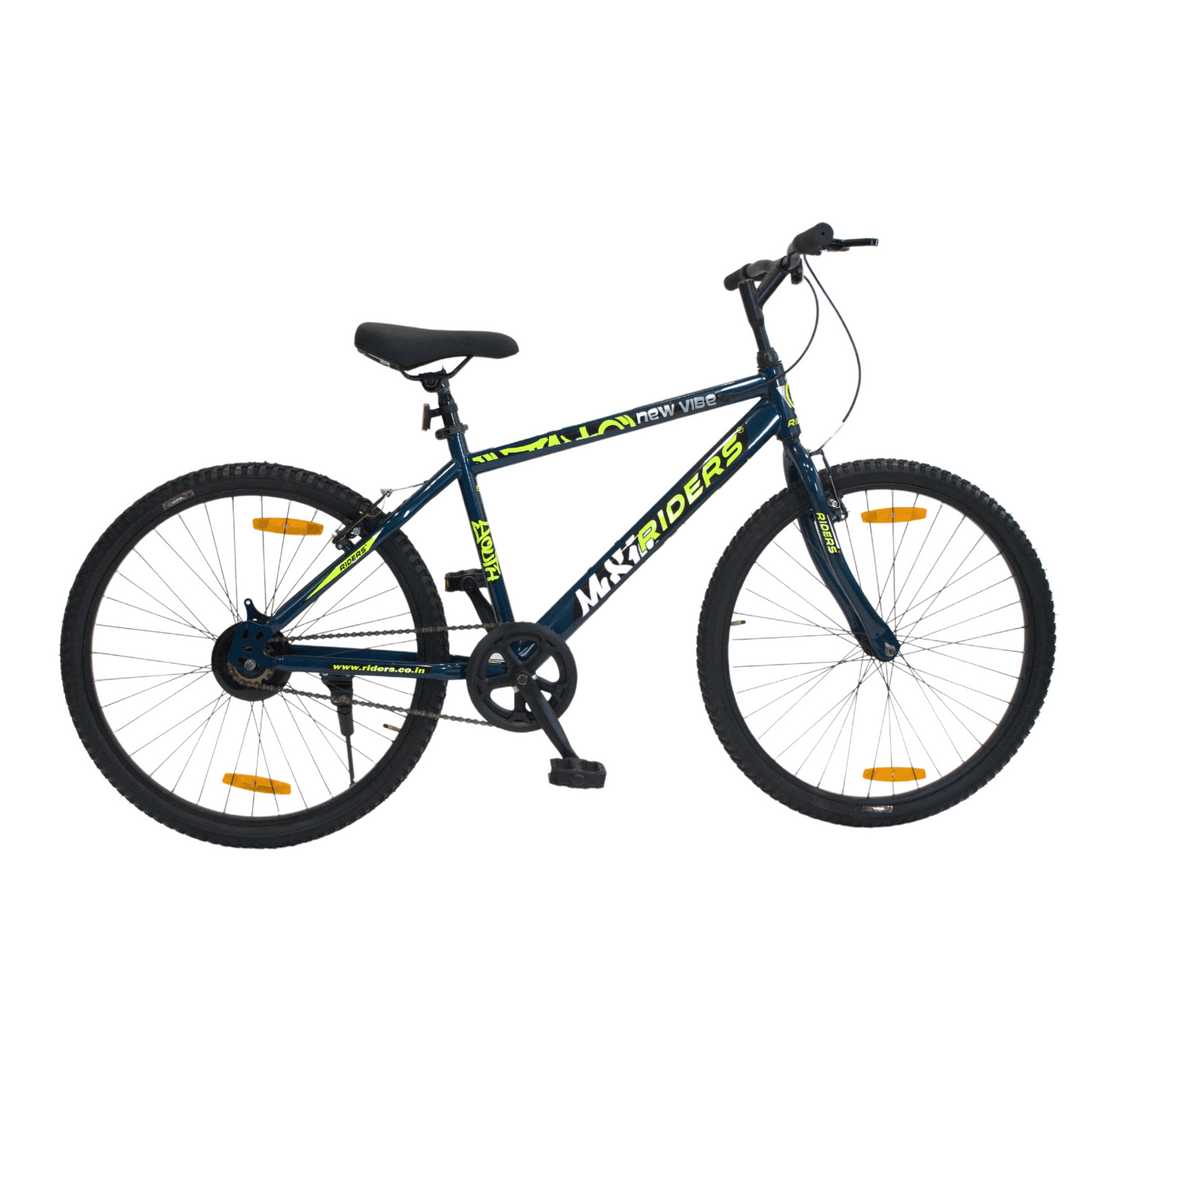 RIDERS New Vibe 26" | Mountain Bicycle | Single Speed | Age 14+ Years image  4 